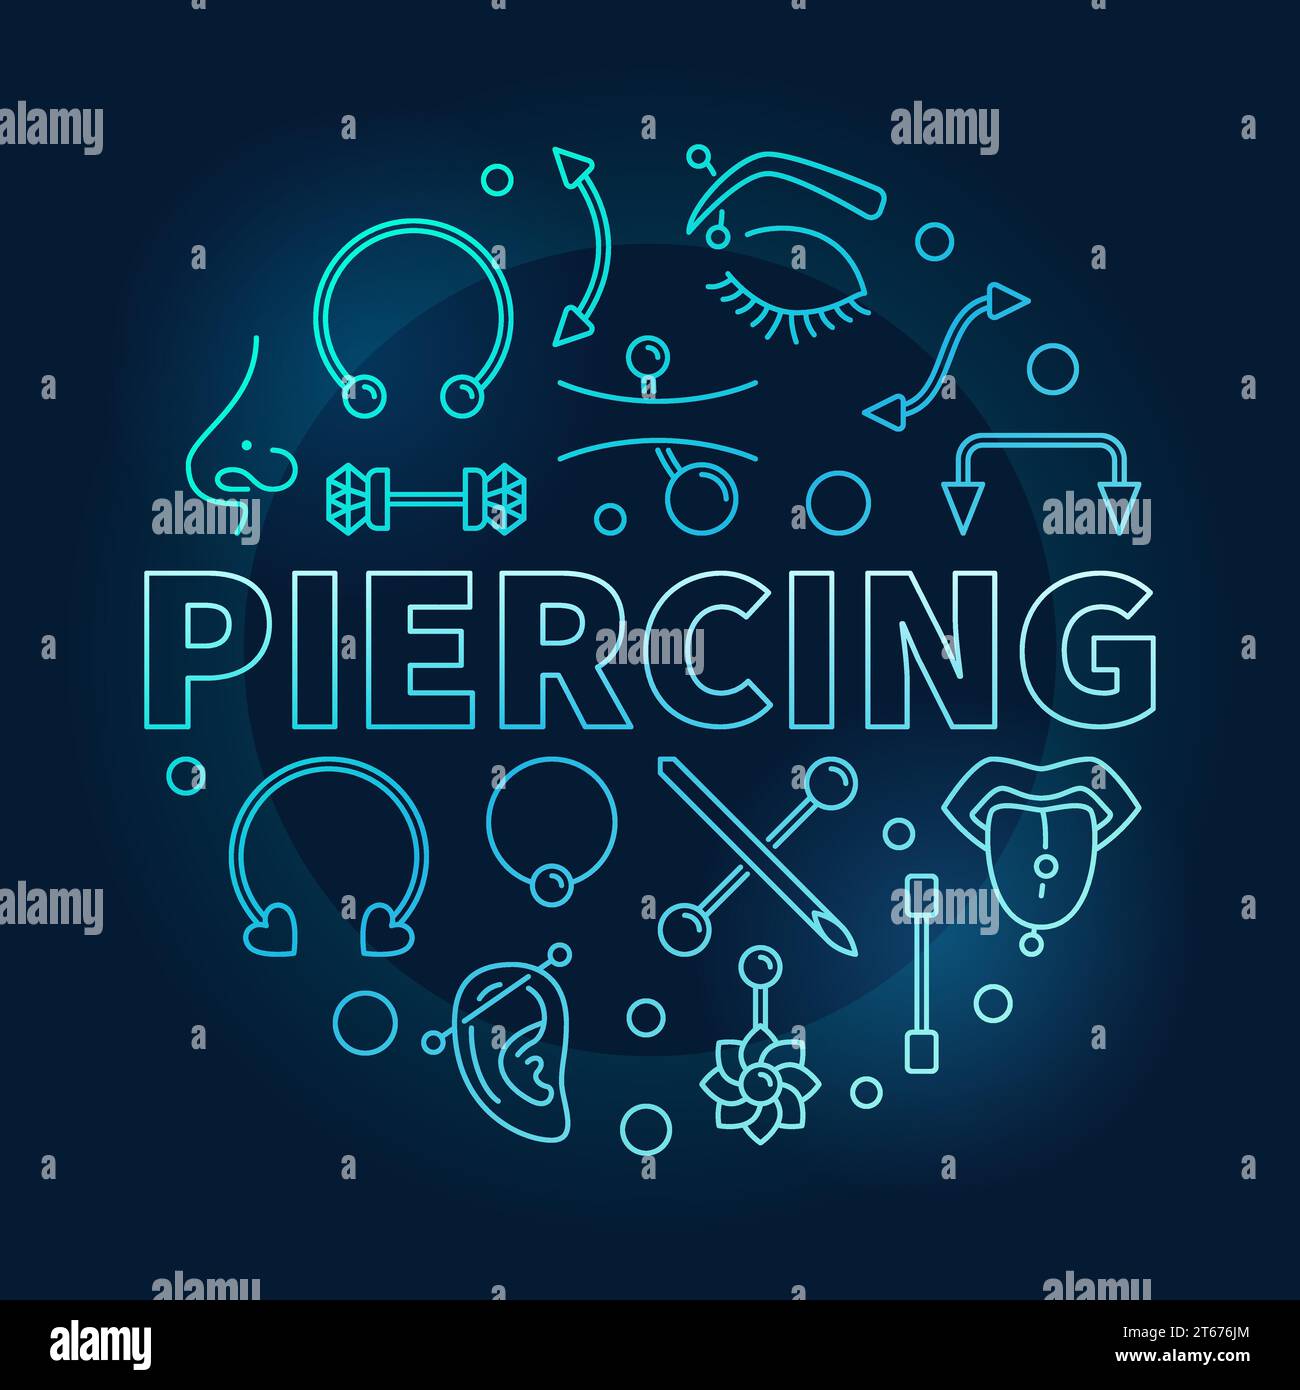 Piercing blue vector round illustration made with thin line piercings icons on dark background Stock Vector